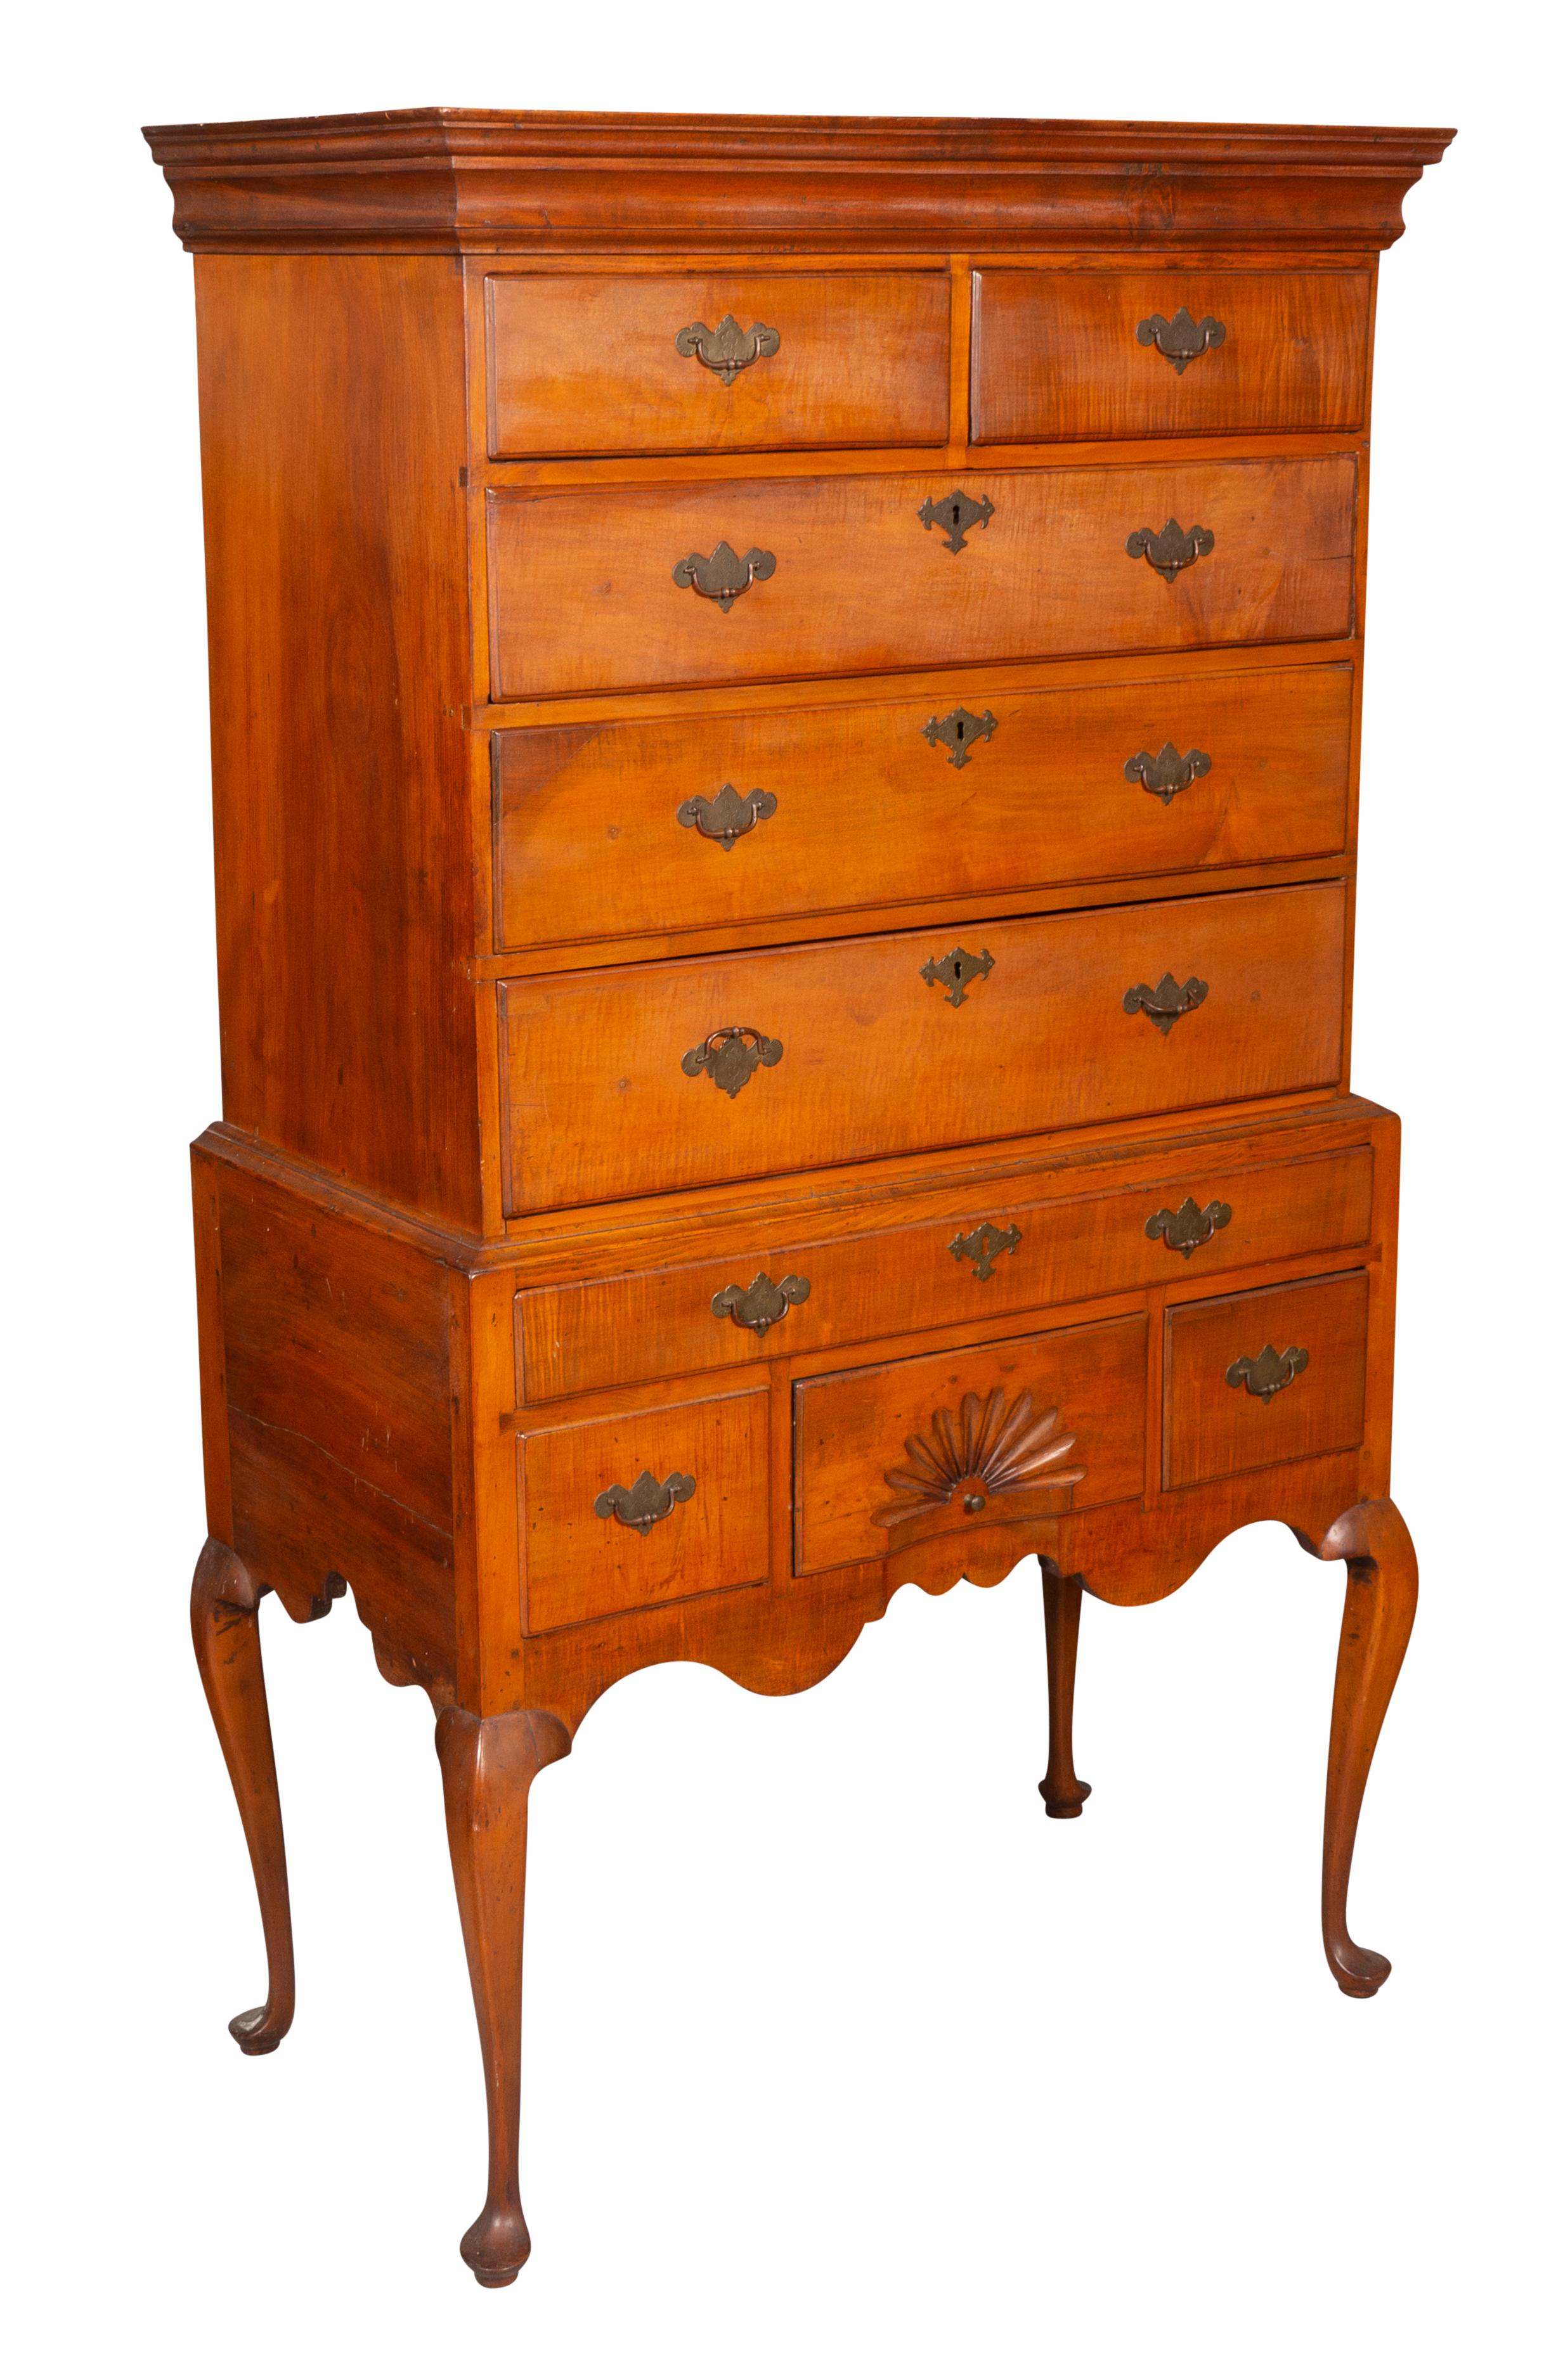 Rectangular cornice over two over three drawers, base with a long drawer over two drawers flanking a fan carved drawer, raised on cabriole legs and pad feet.